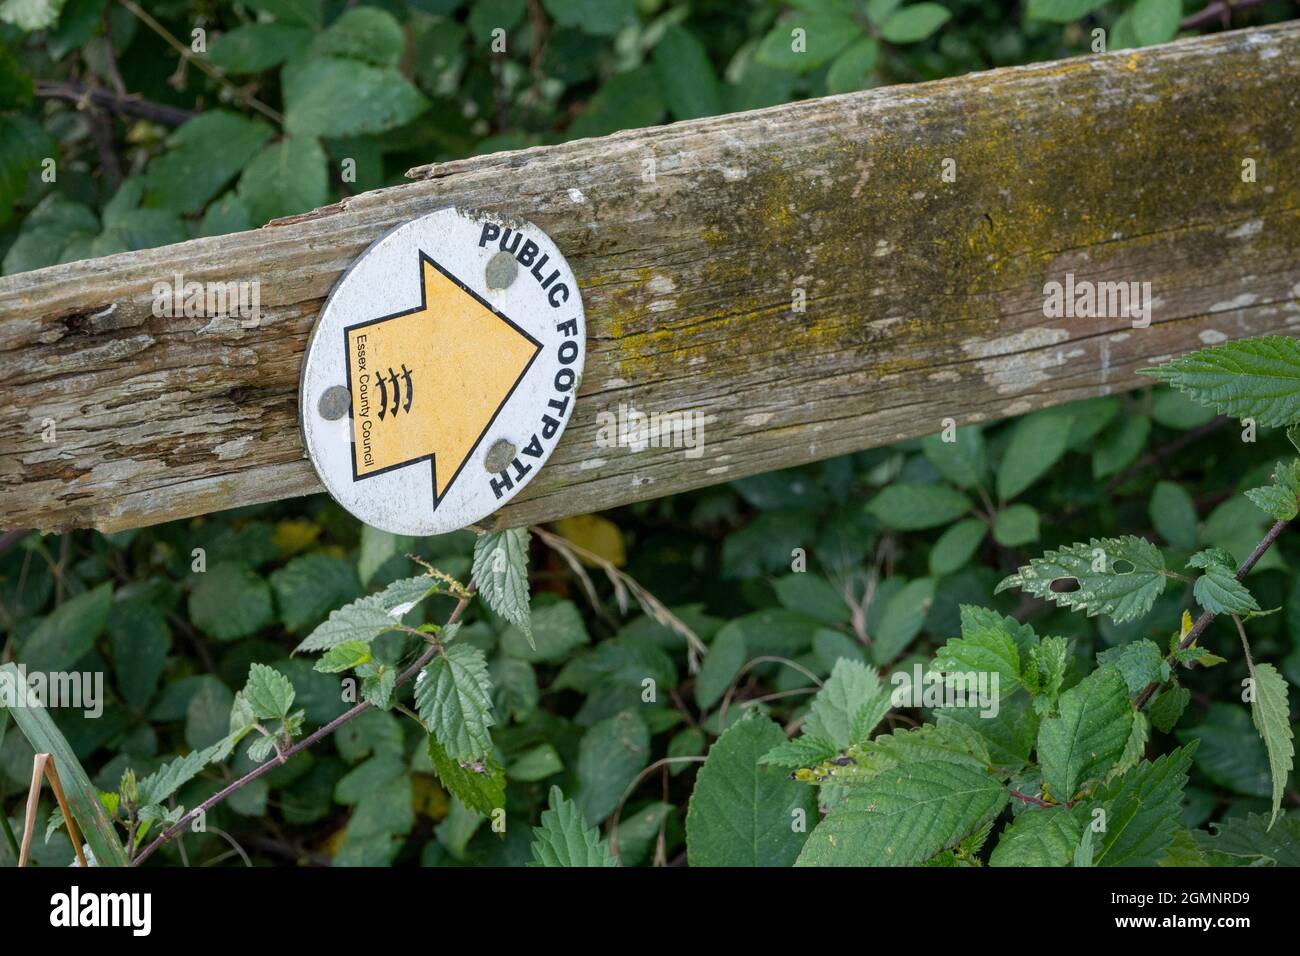 Public footpath sign on a roundel with yellow arrow on a white background a wooden gate bar pointing Stock Photo - Alamy